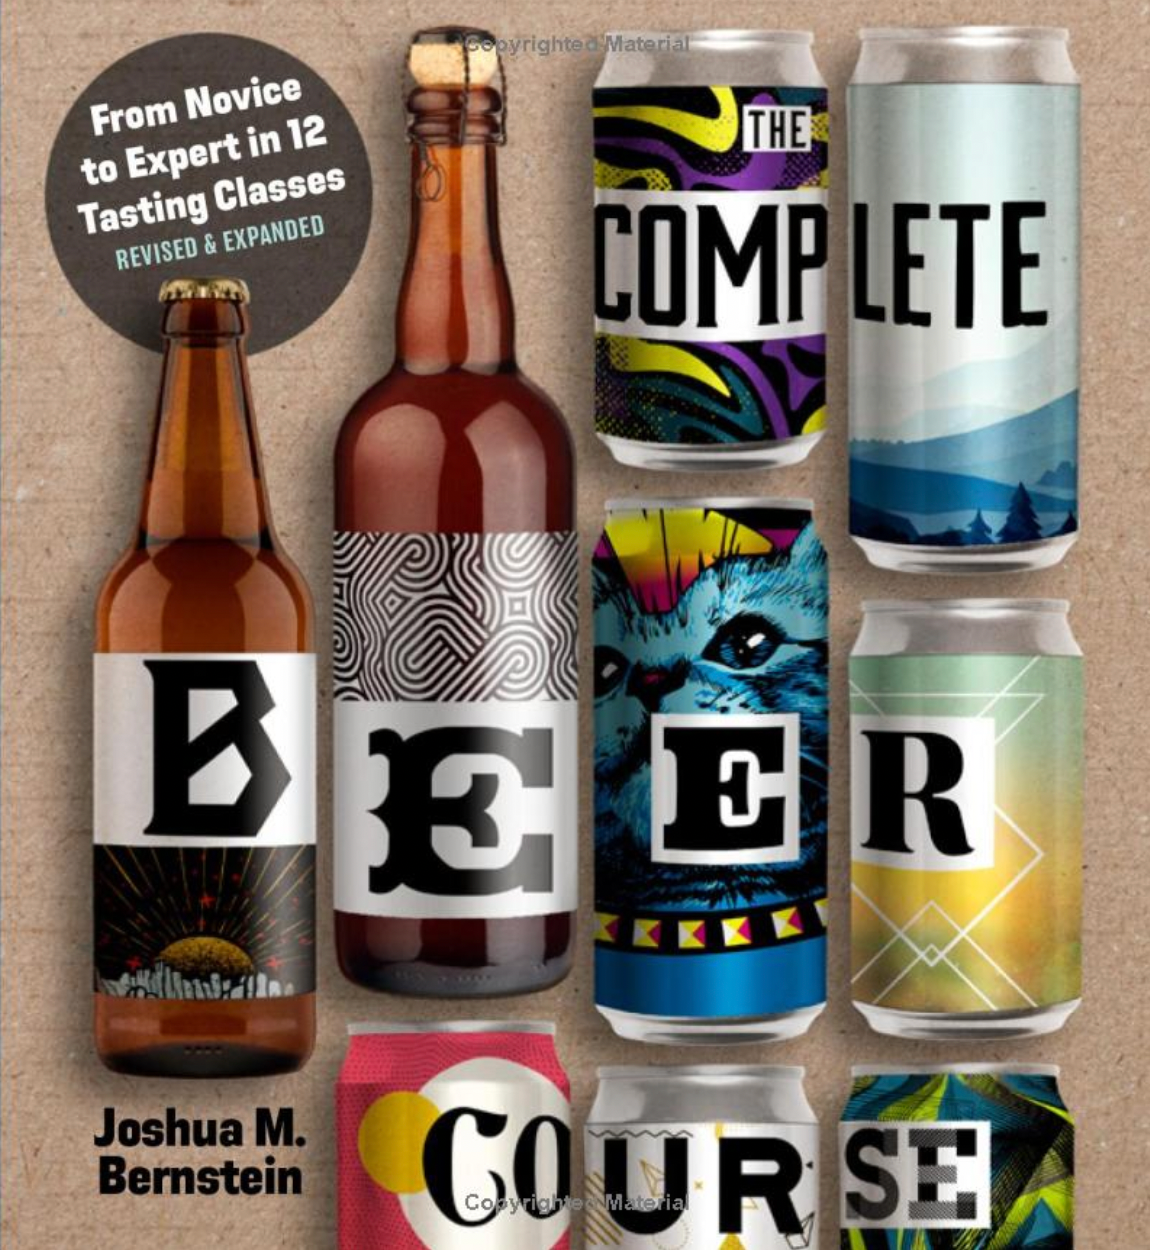 The Complete Beer Course by Joshua M. Bernstein